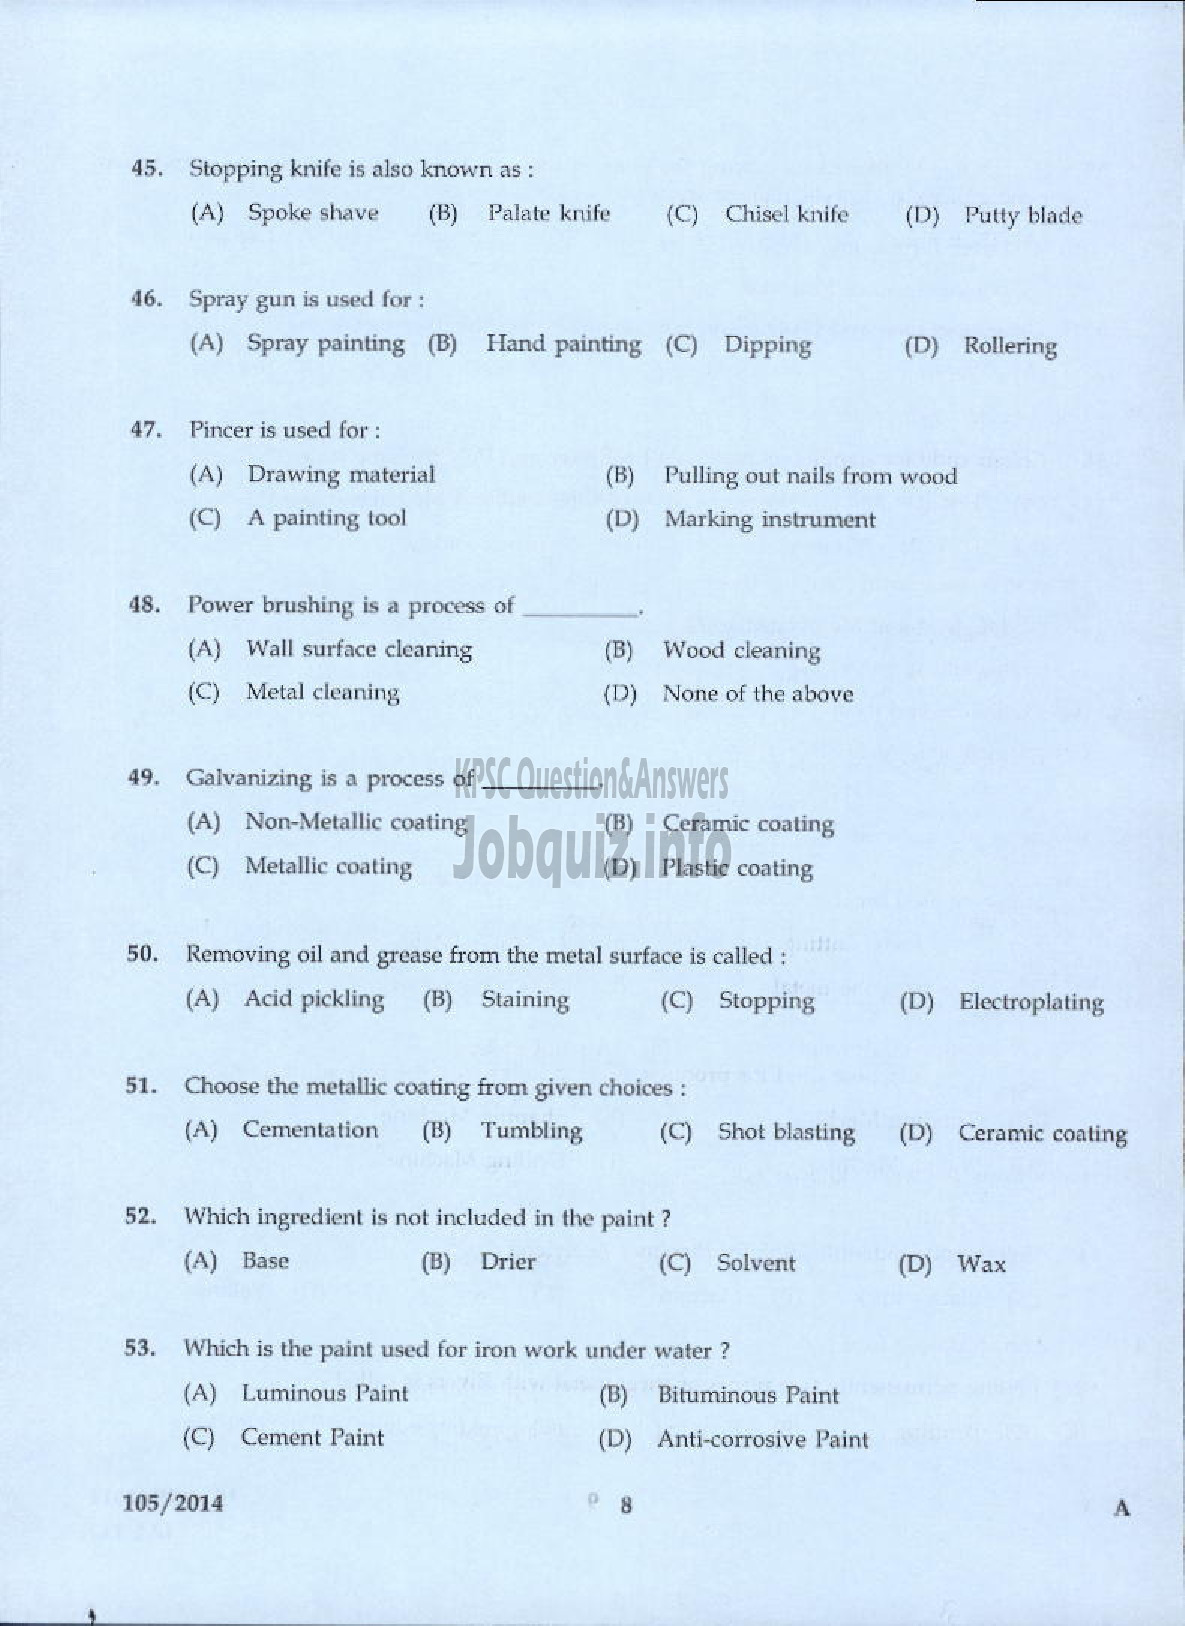 Kerala PSC Question Paper - PAINTER KERALA AGRO MACHINERY CORPORATION LIMITED-6